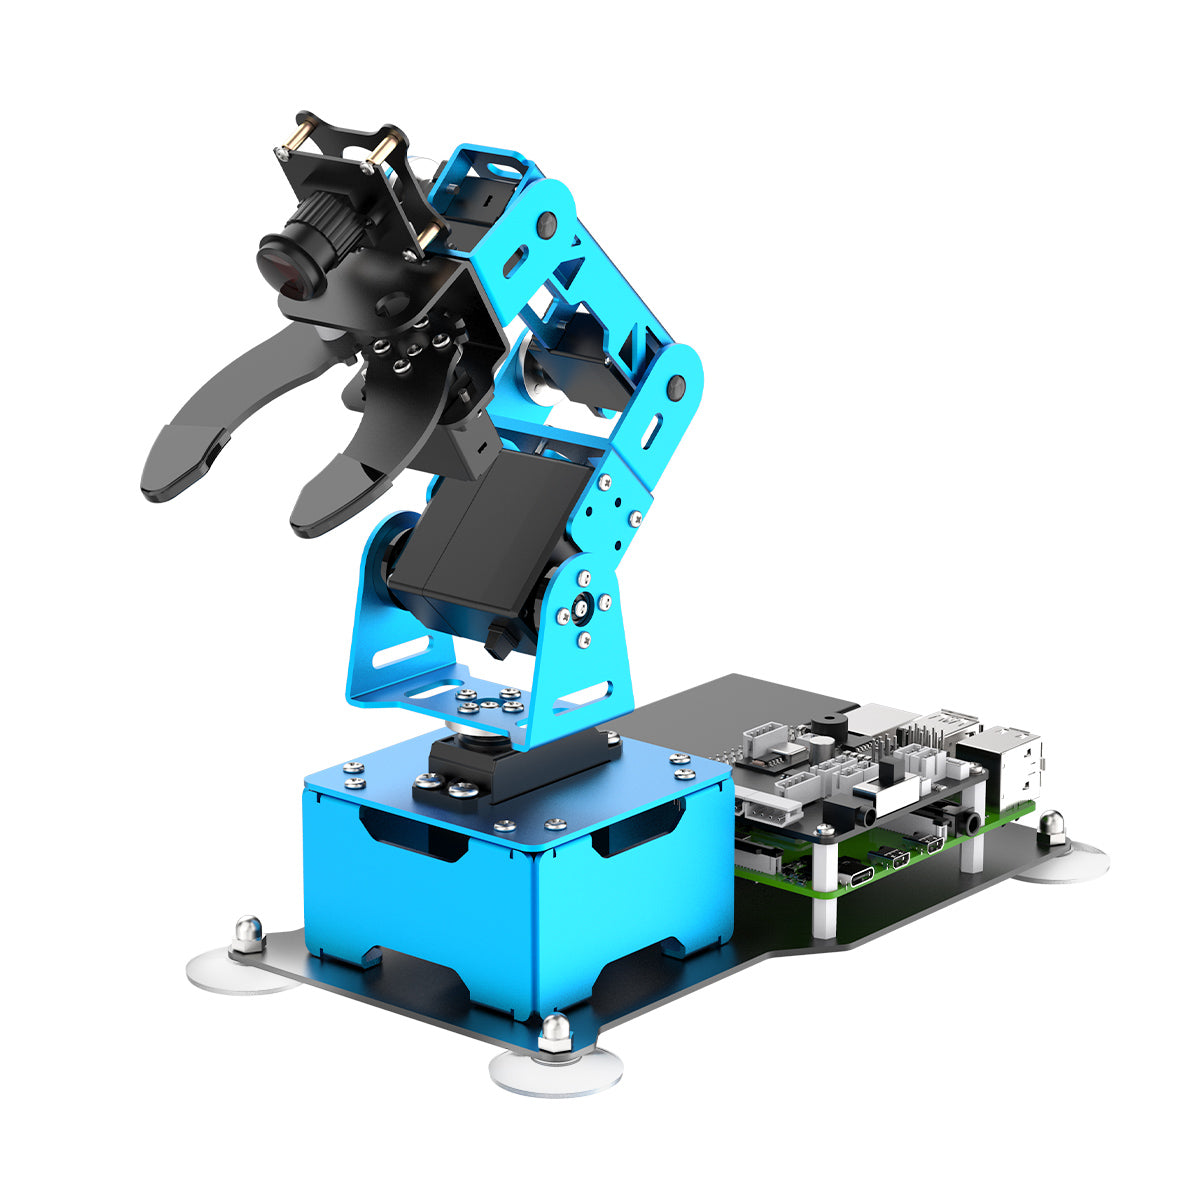 Hiwonder ArmPi mini 5DOF Vision Robotic Arm Powered by Raspberry Pi 5 Support Python, OpenCV Target Tracking for Beginners